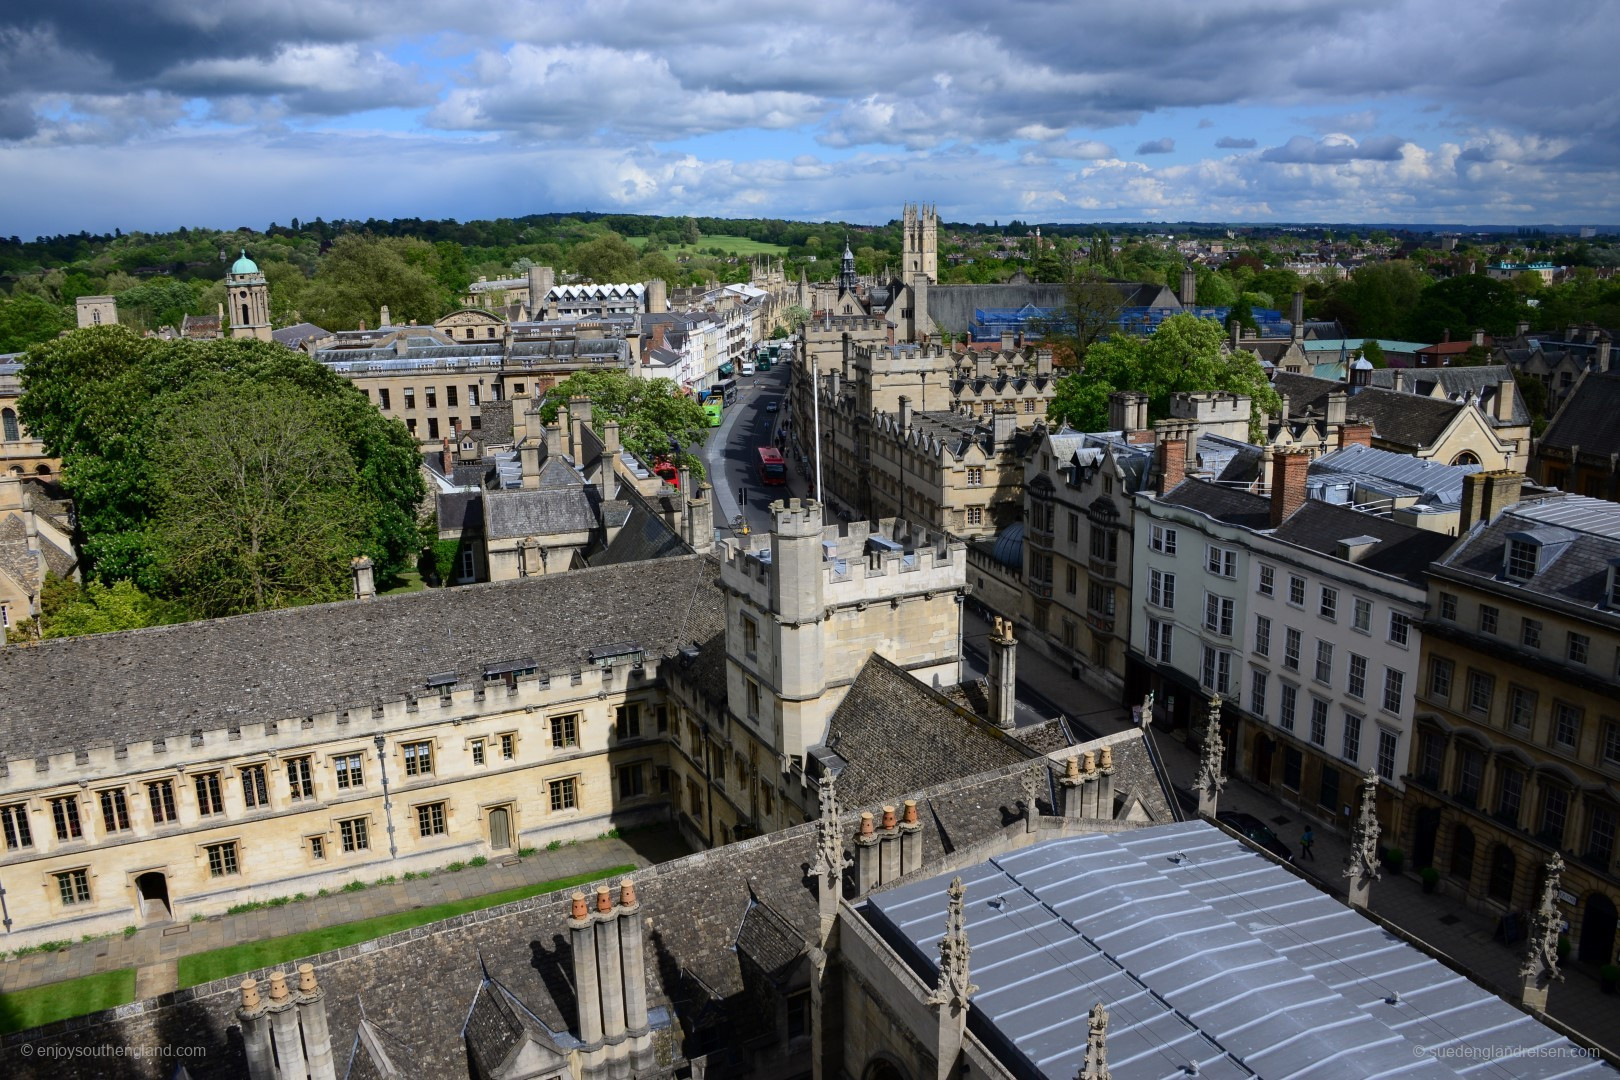 Oxford - View of the city from the church tower